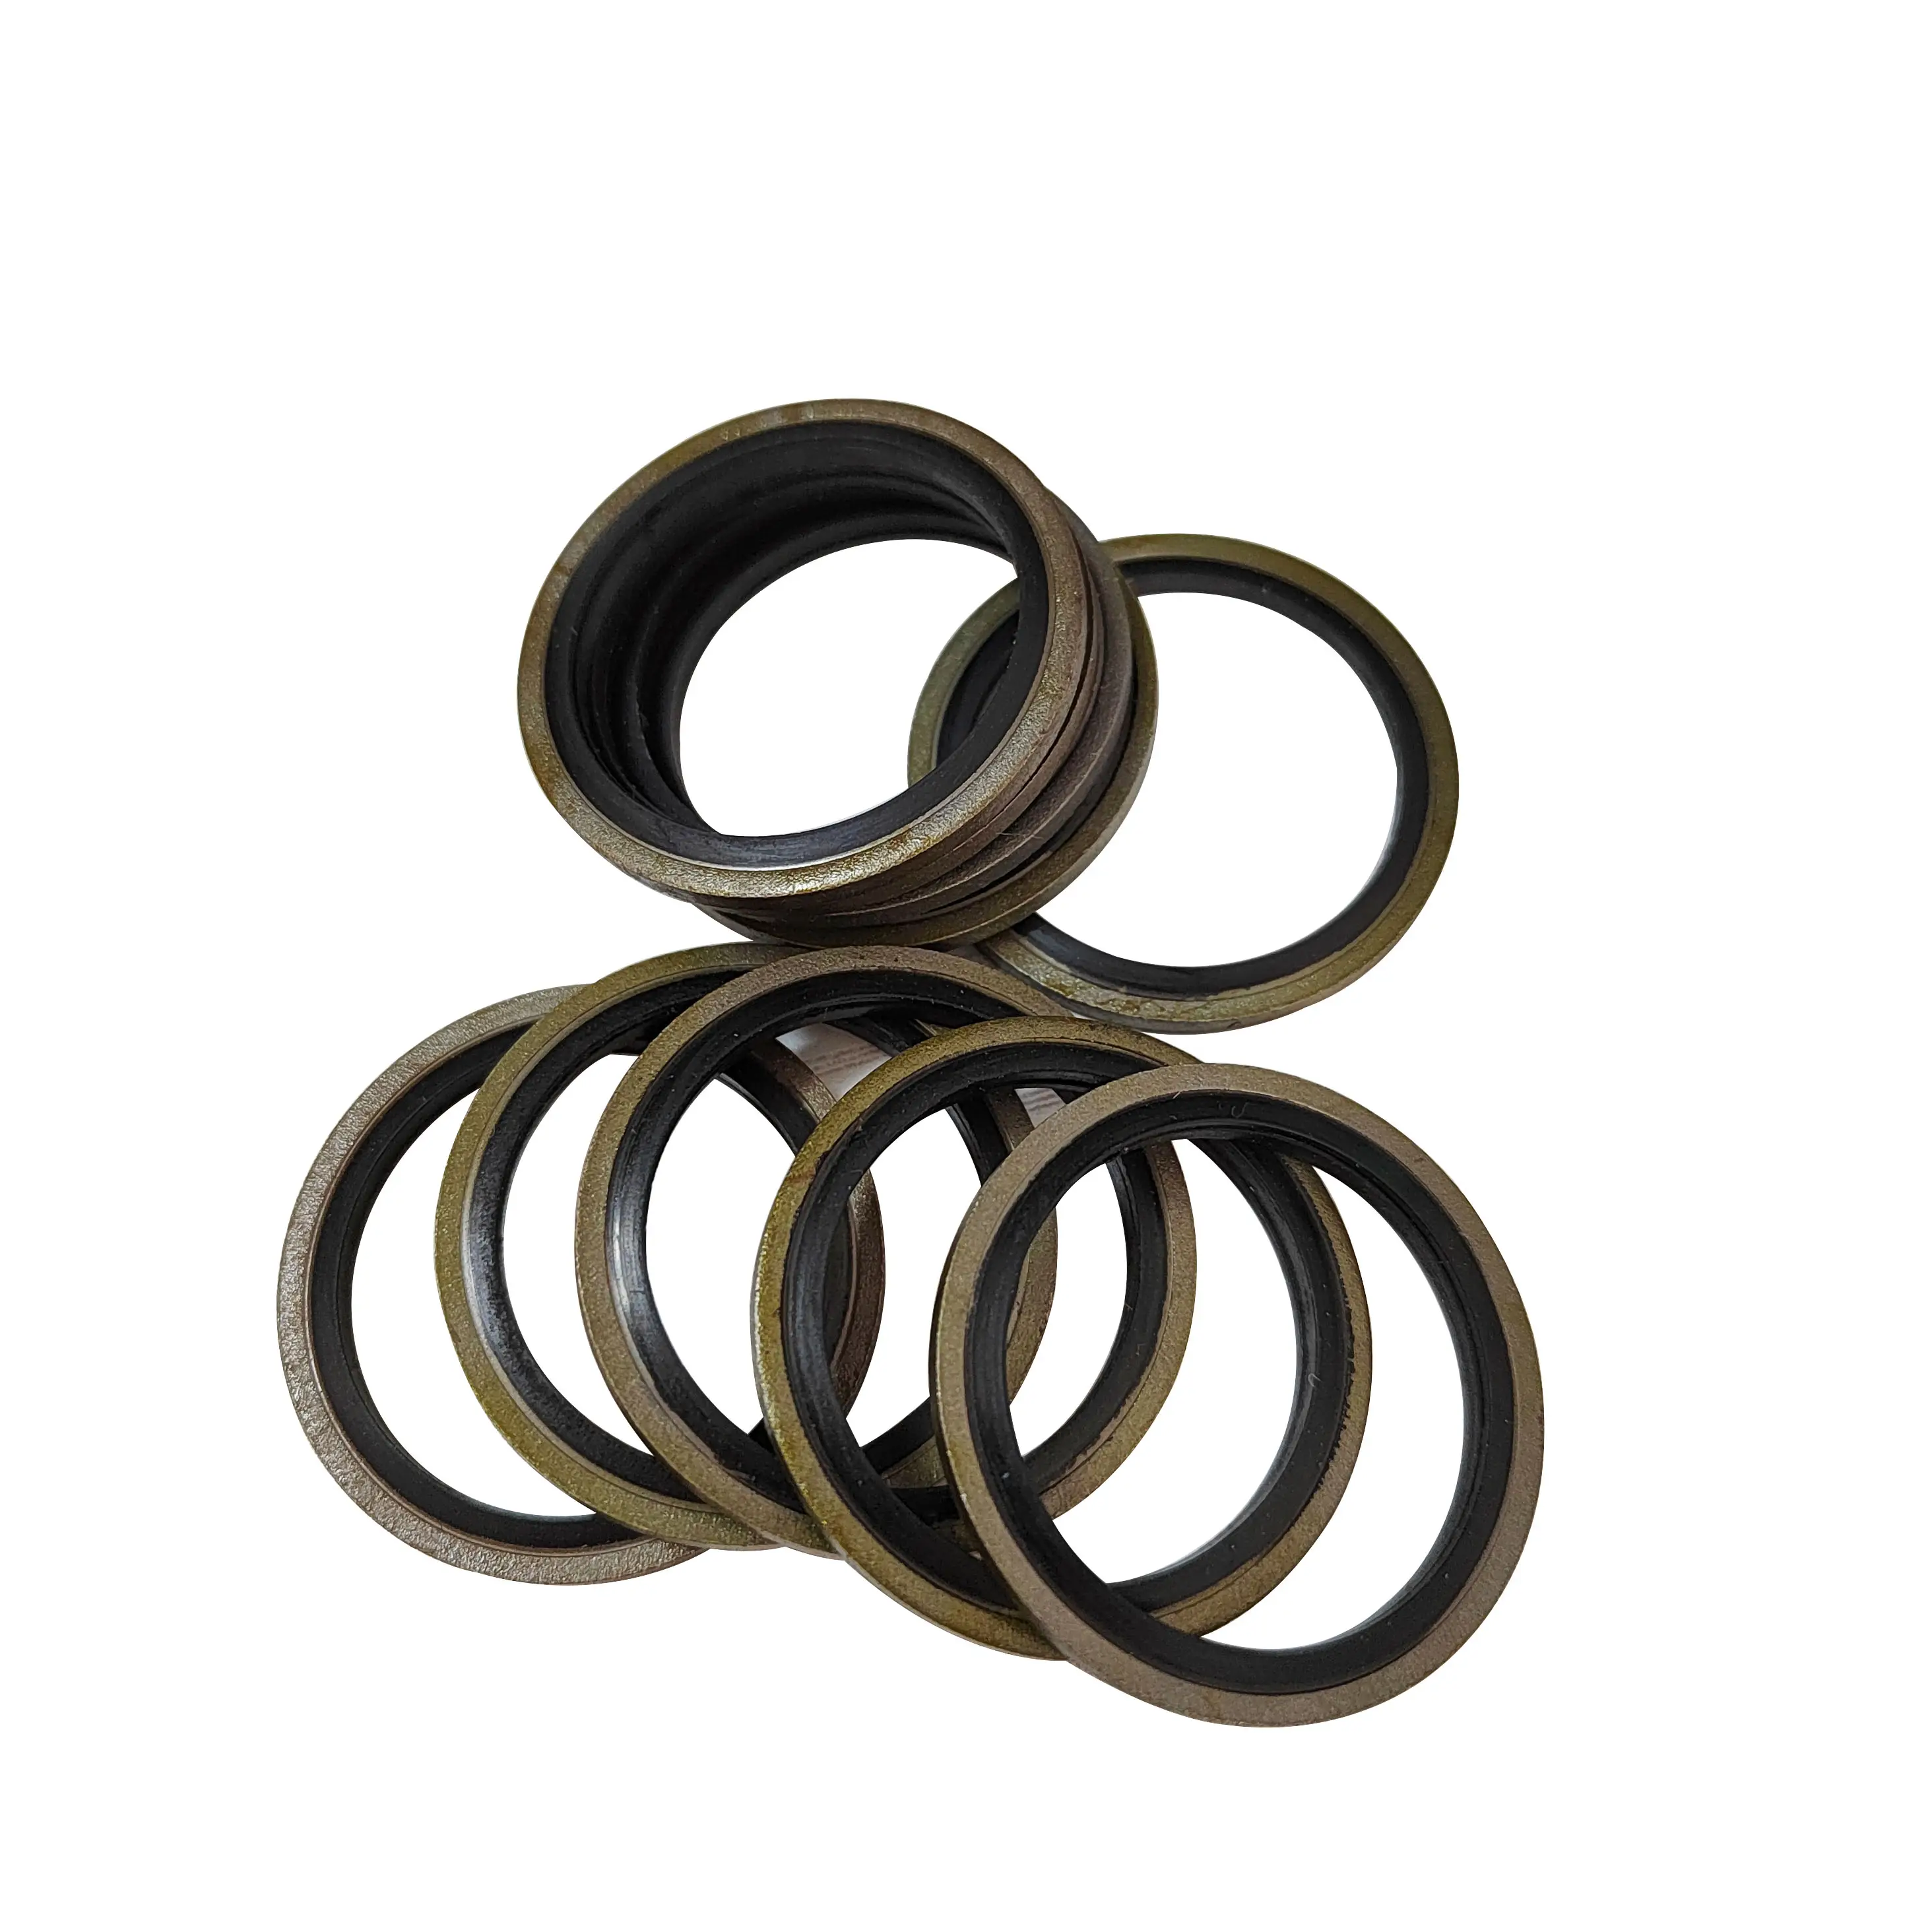 DF seals bonded washer NBR FKM rubber metal usit ring mechanical oilproof self adhesive compound seal ring